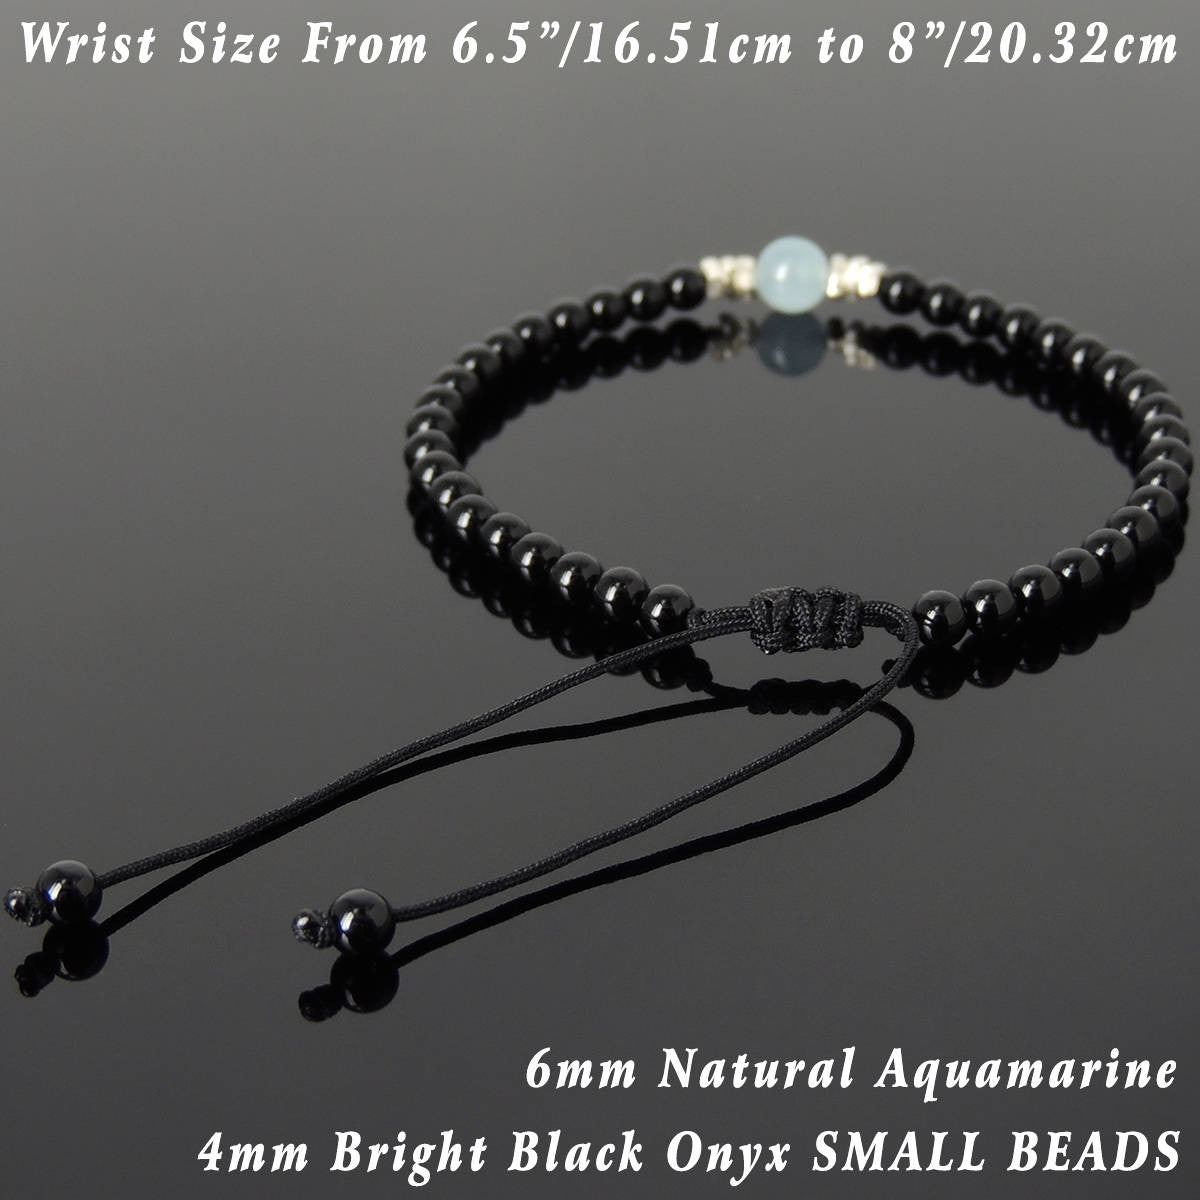 Aquamarine & Bright Black Onyx Adjustable Braided Bracelet with S925 Sterling Silver Nugget Beads - Handmade by Gem & Silver BR1124